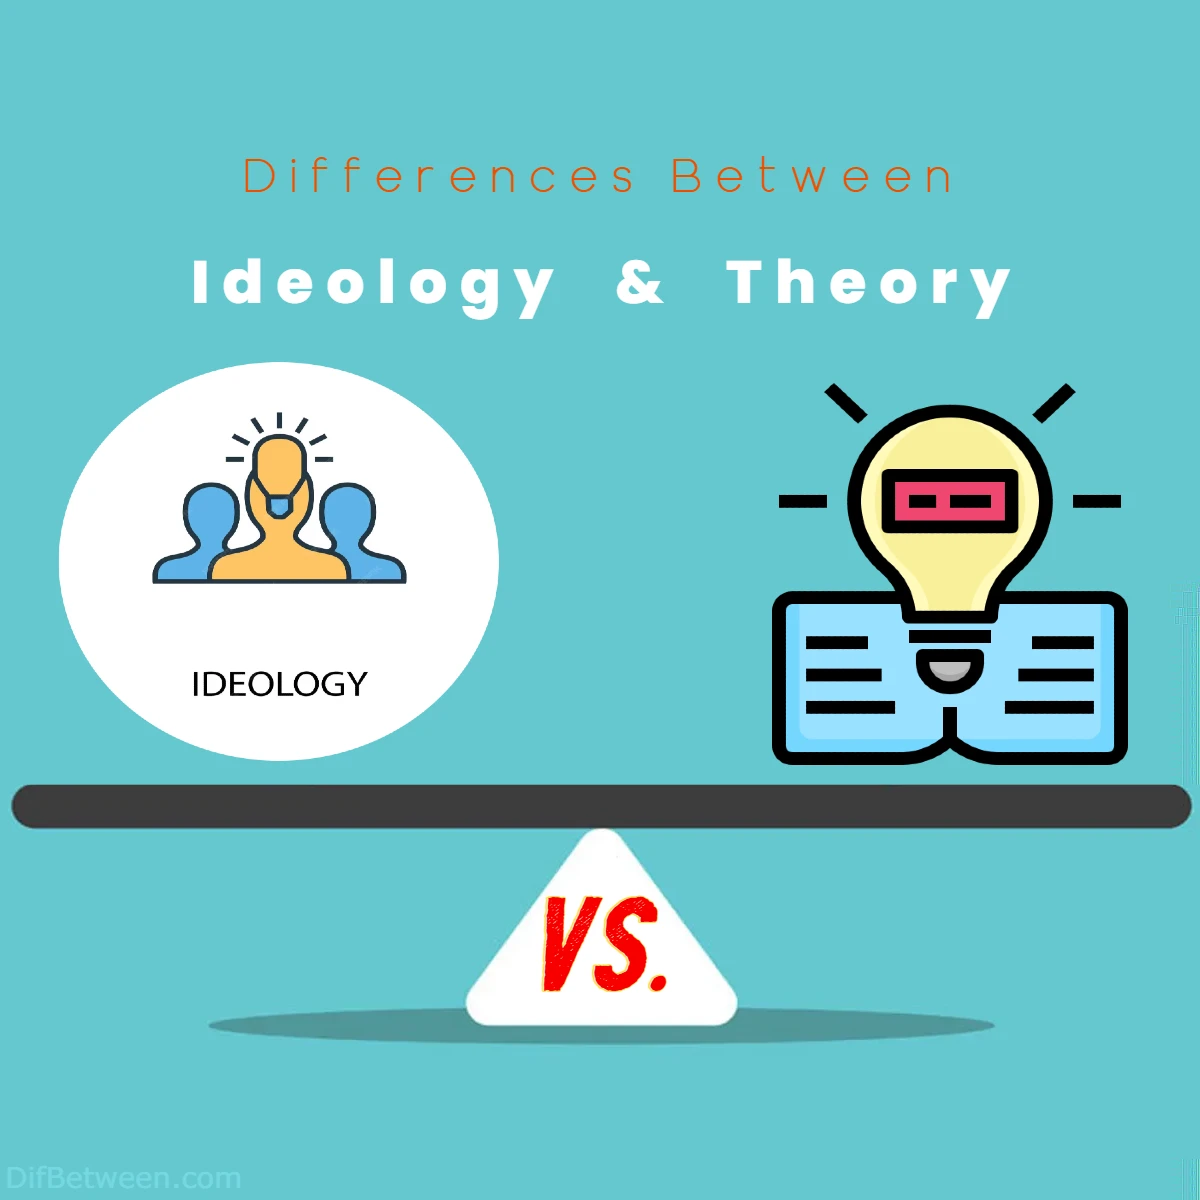 Differences Between Ideology vs Theory